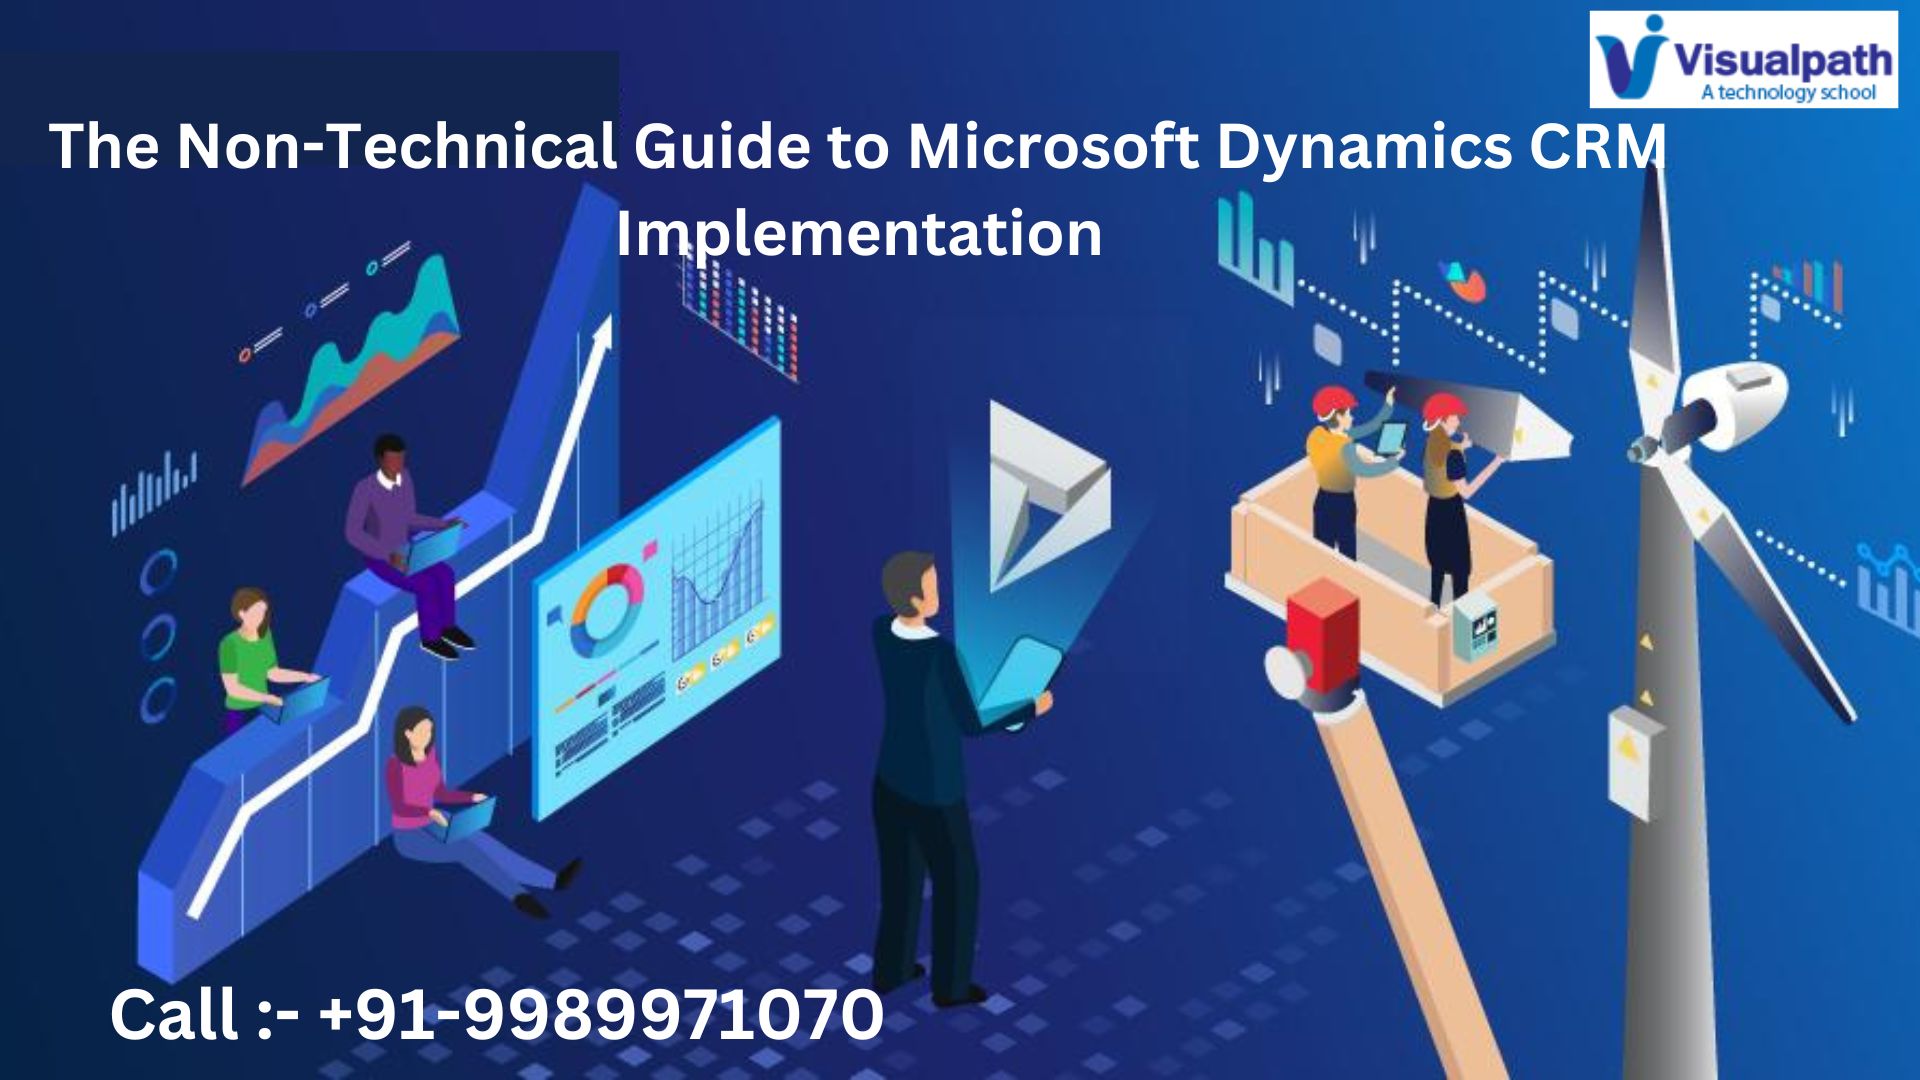 The Non-Technical Guide to Microsoft Dynamics CRM Implementation